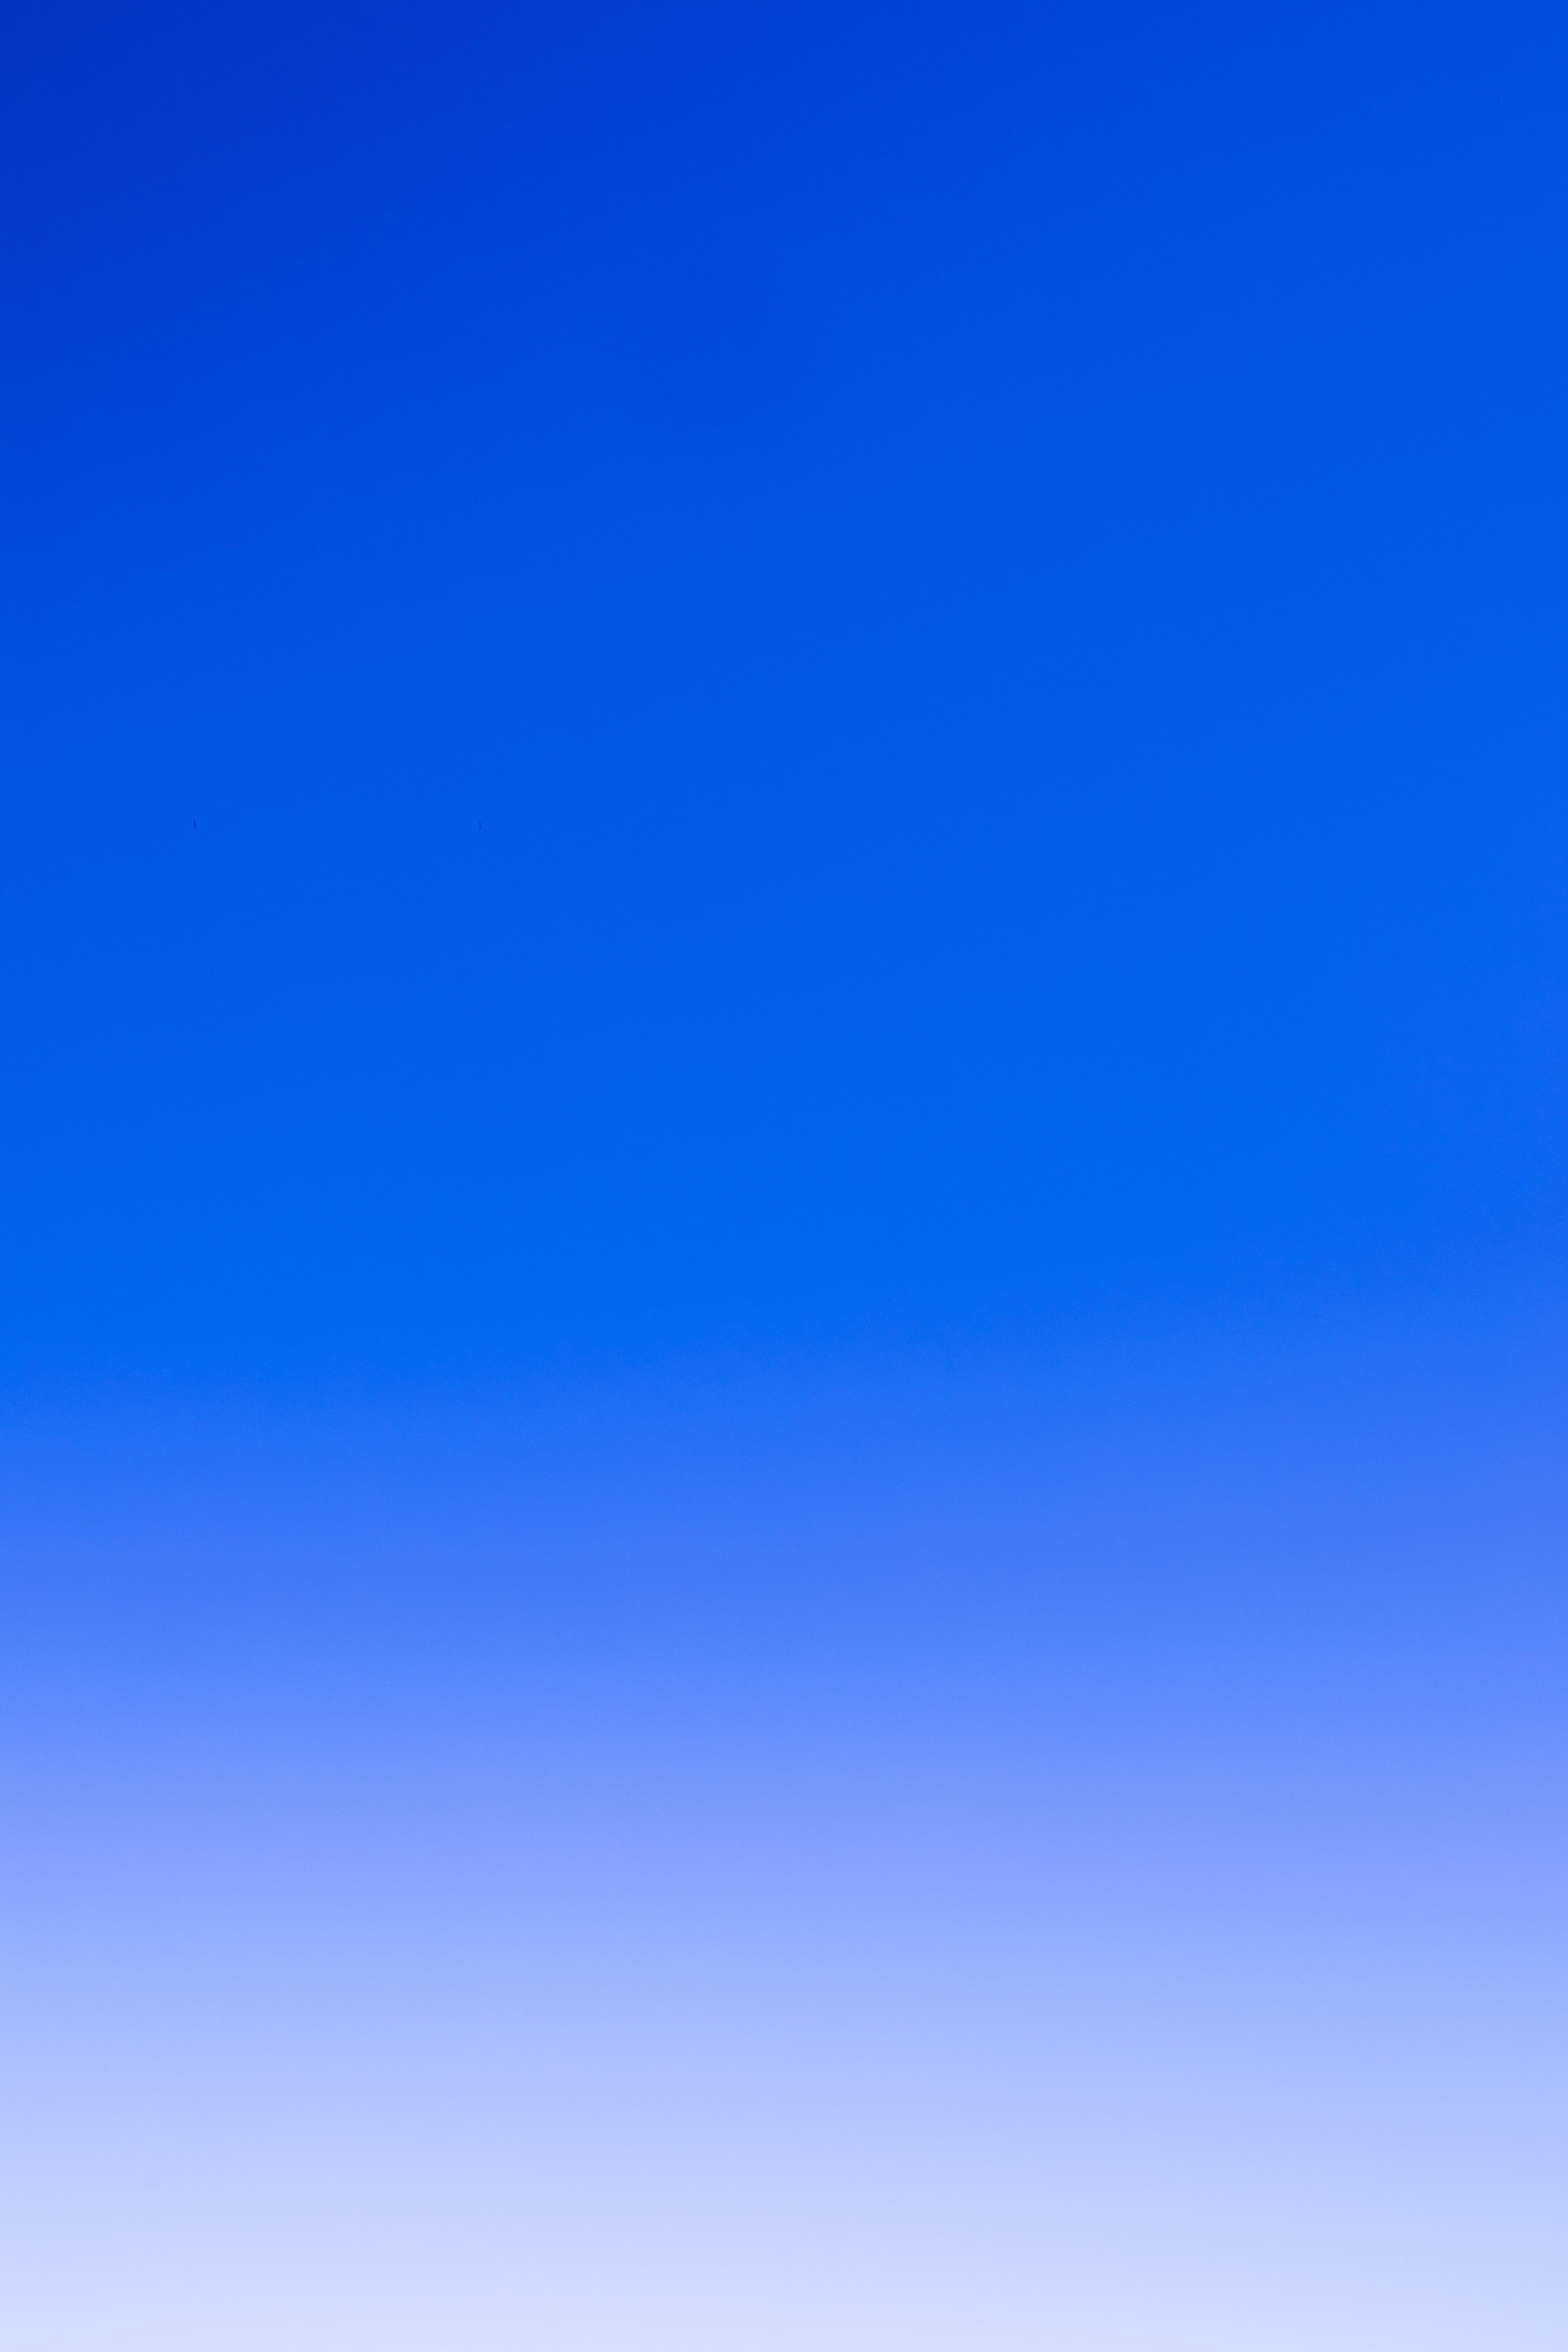 Sky Blue Colour Wallpapers - Top Free Sky Blue Colour Backgrounds -  WallpaperAccess